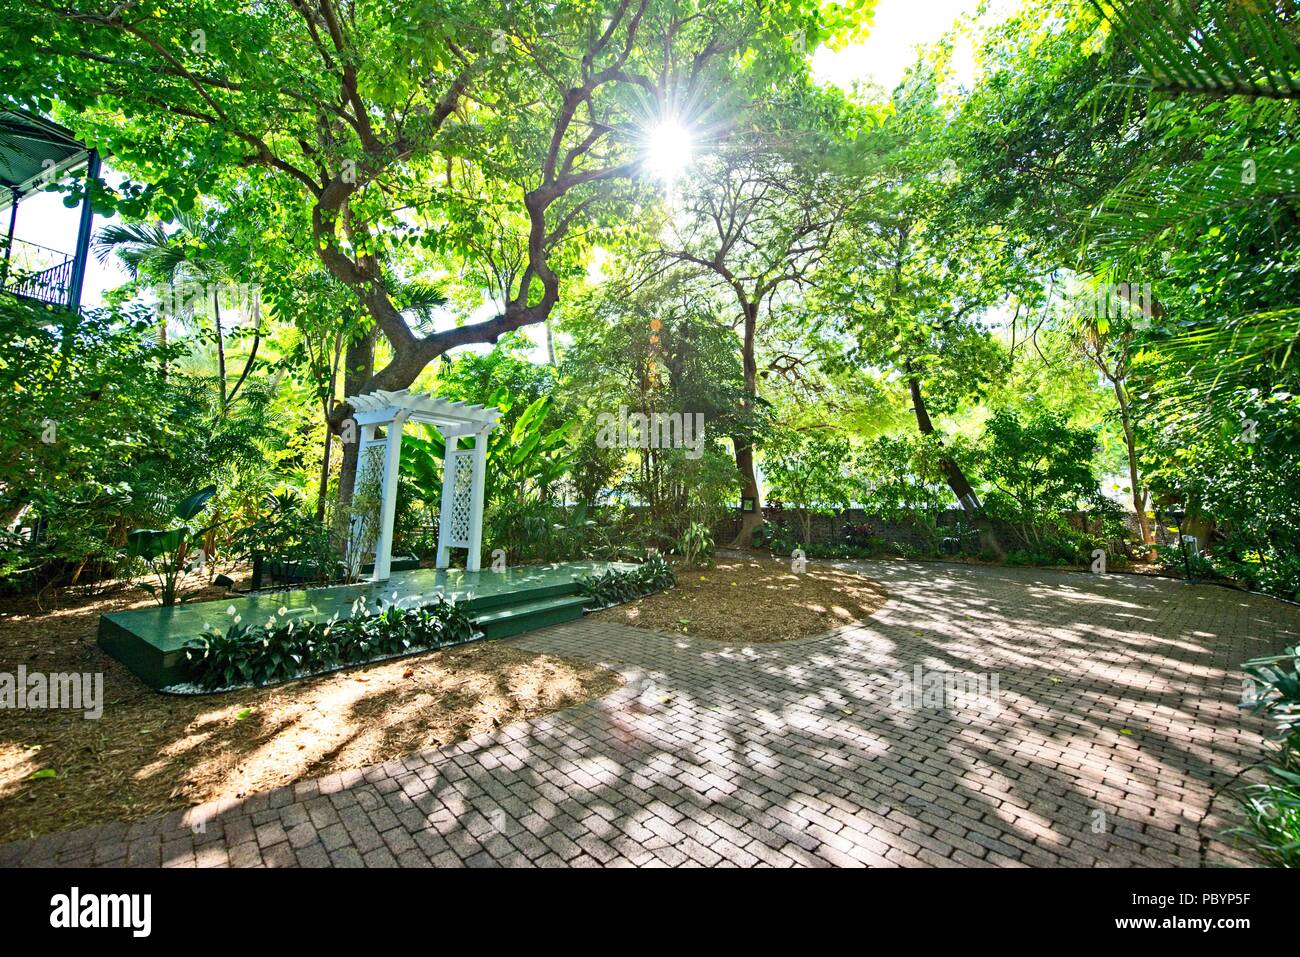 A bricked paved path that leads to a lush green garden area covered with green trees filled with sunshine Stock Photo